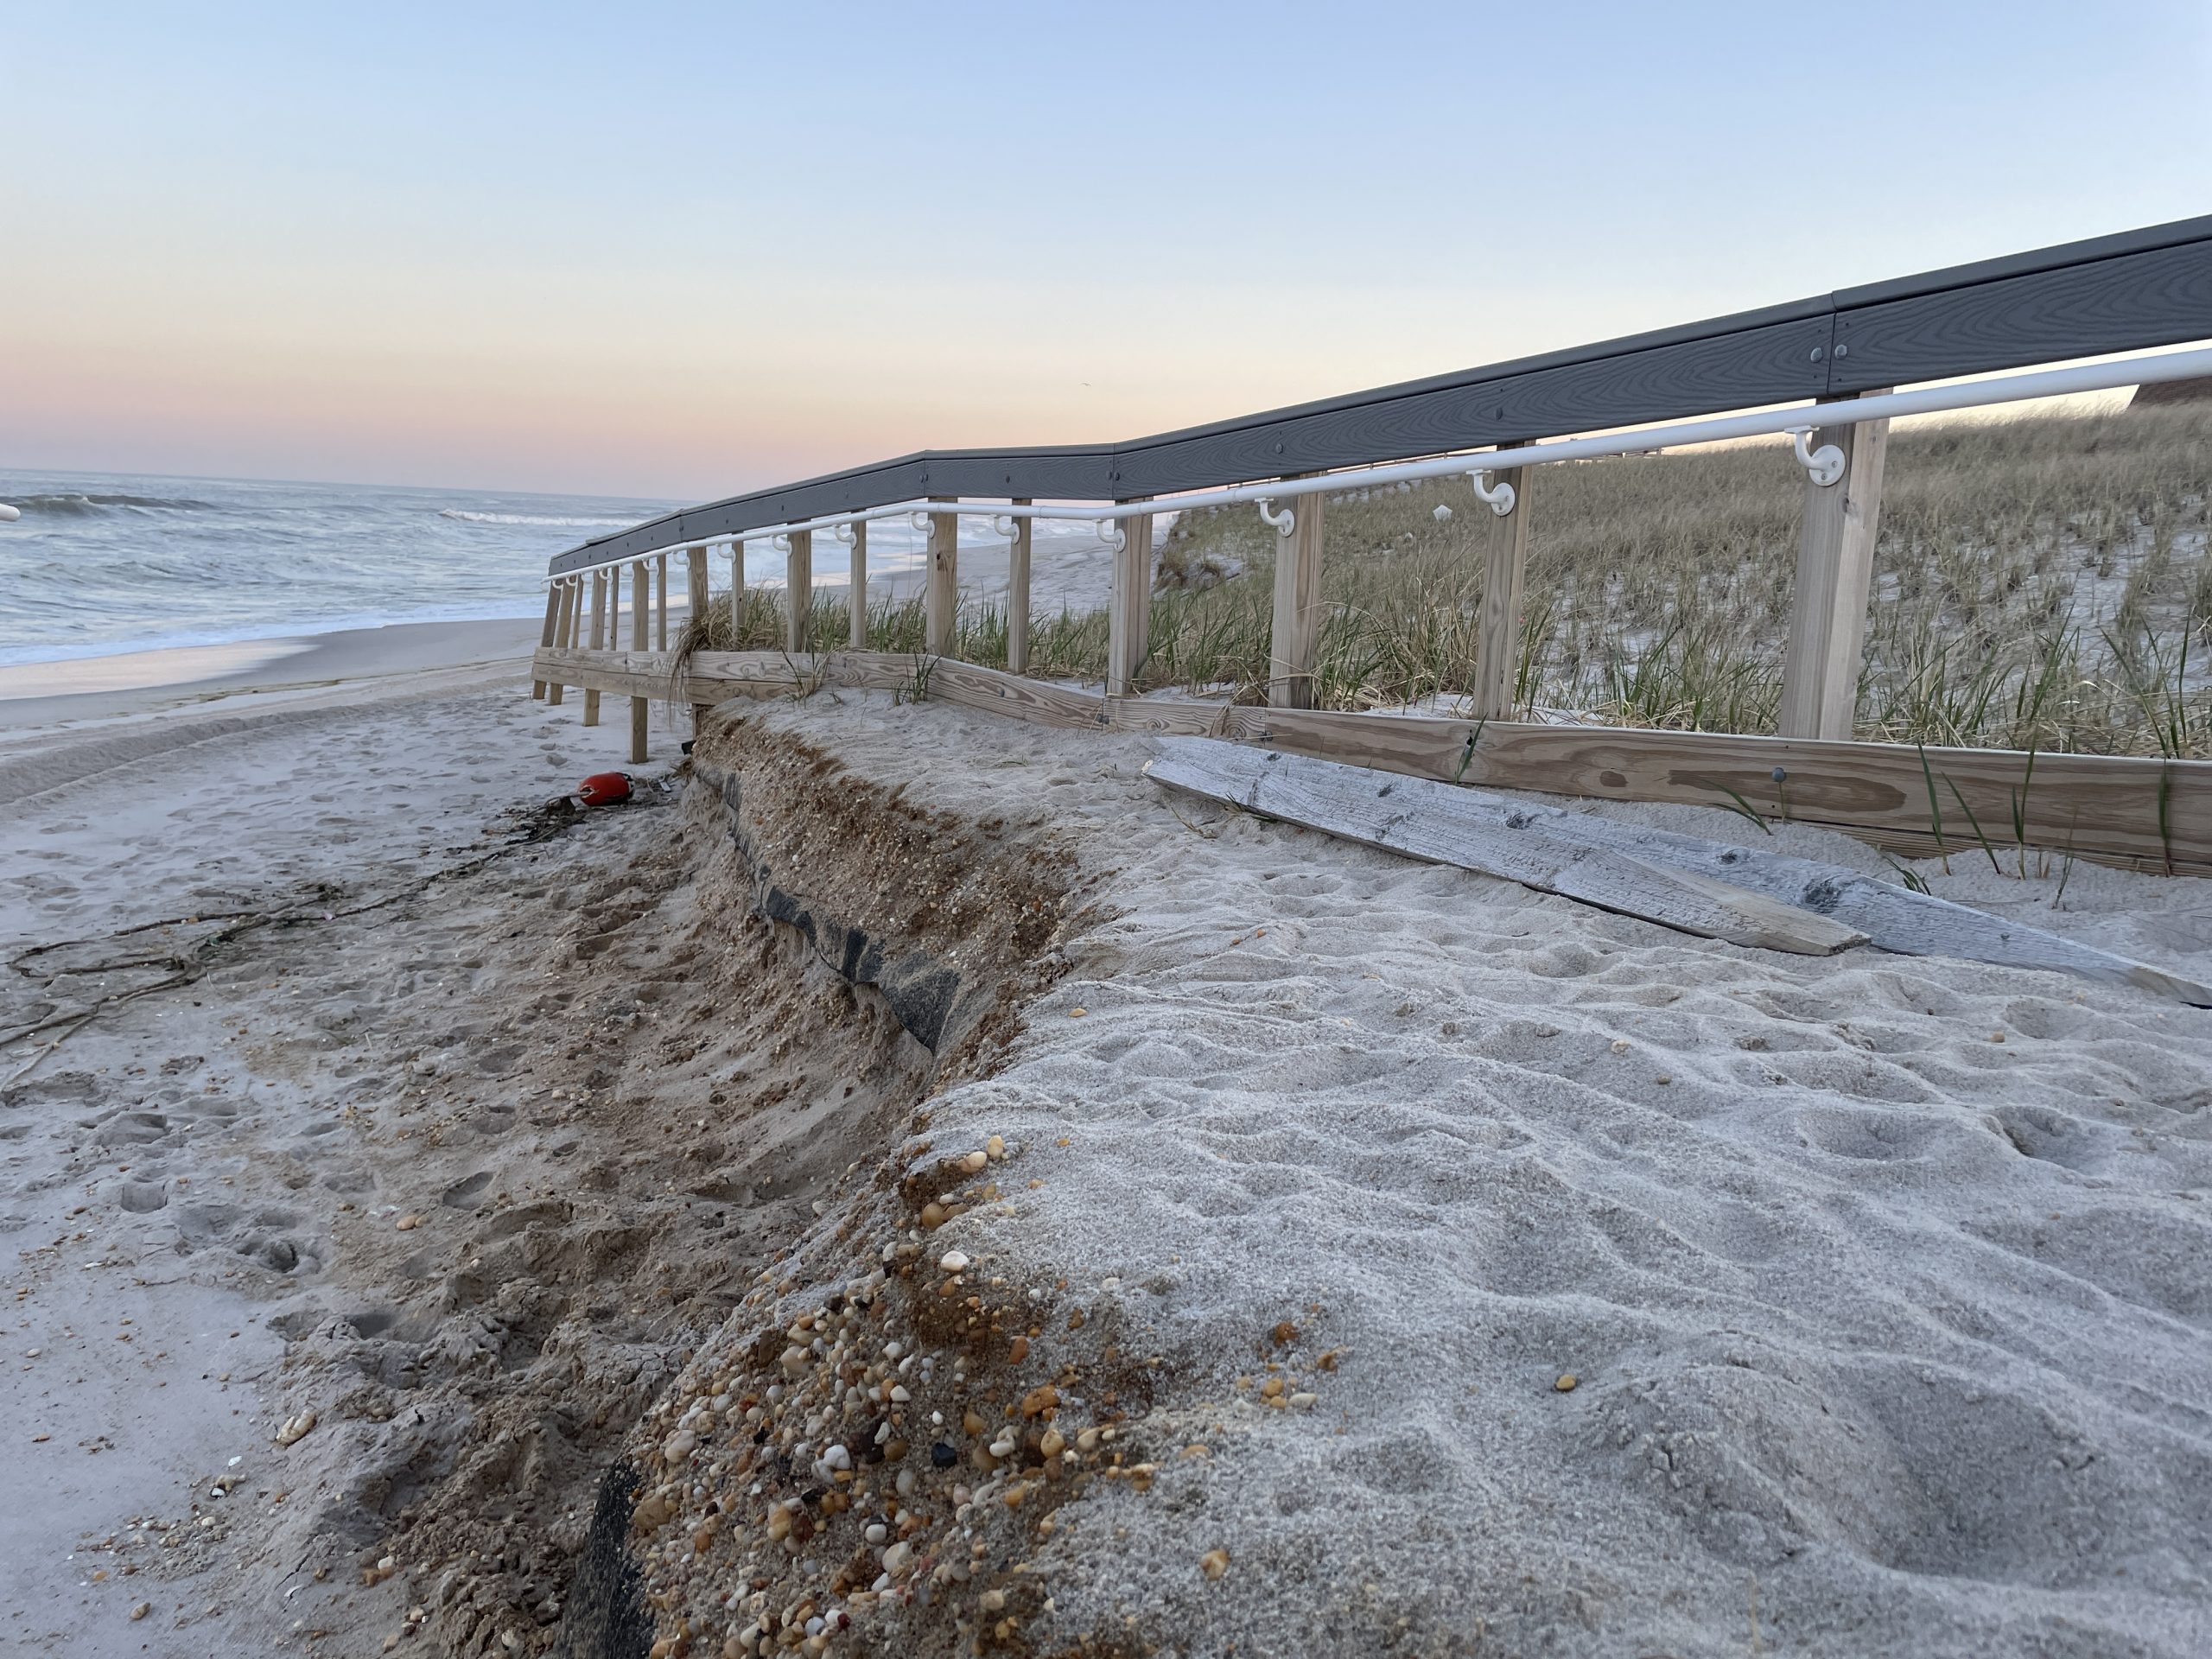 Damage in Ortley Beach left over from the Feb. 1-2, 2021 nor'easter, April 2021. (Photo: Daniel Nee)